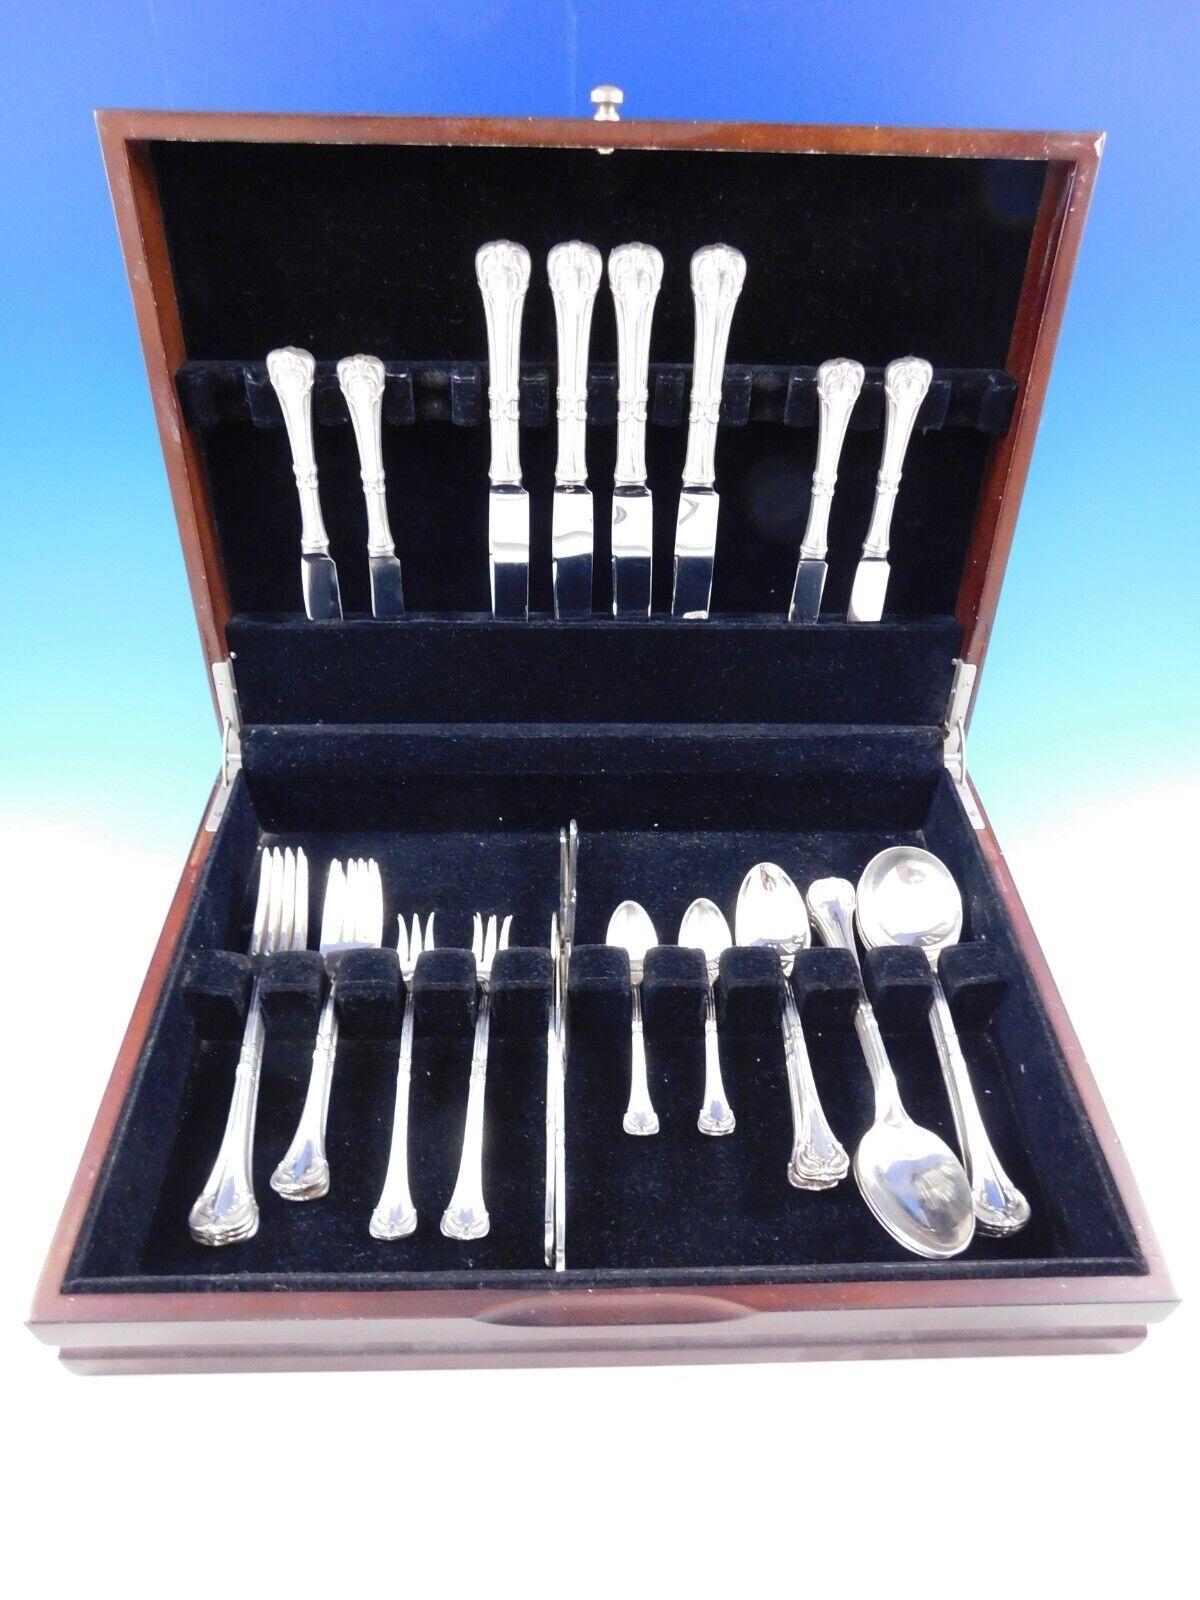 Rare Nupical by Pesa Mexican sterling silver flatware set, 40 pieces. This set includes:

4 knives, 8 3/4